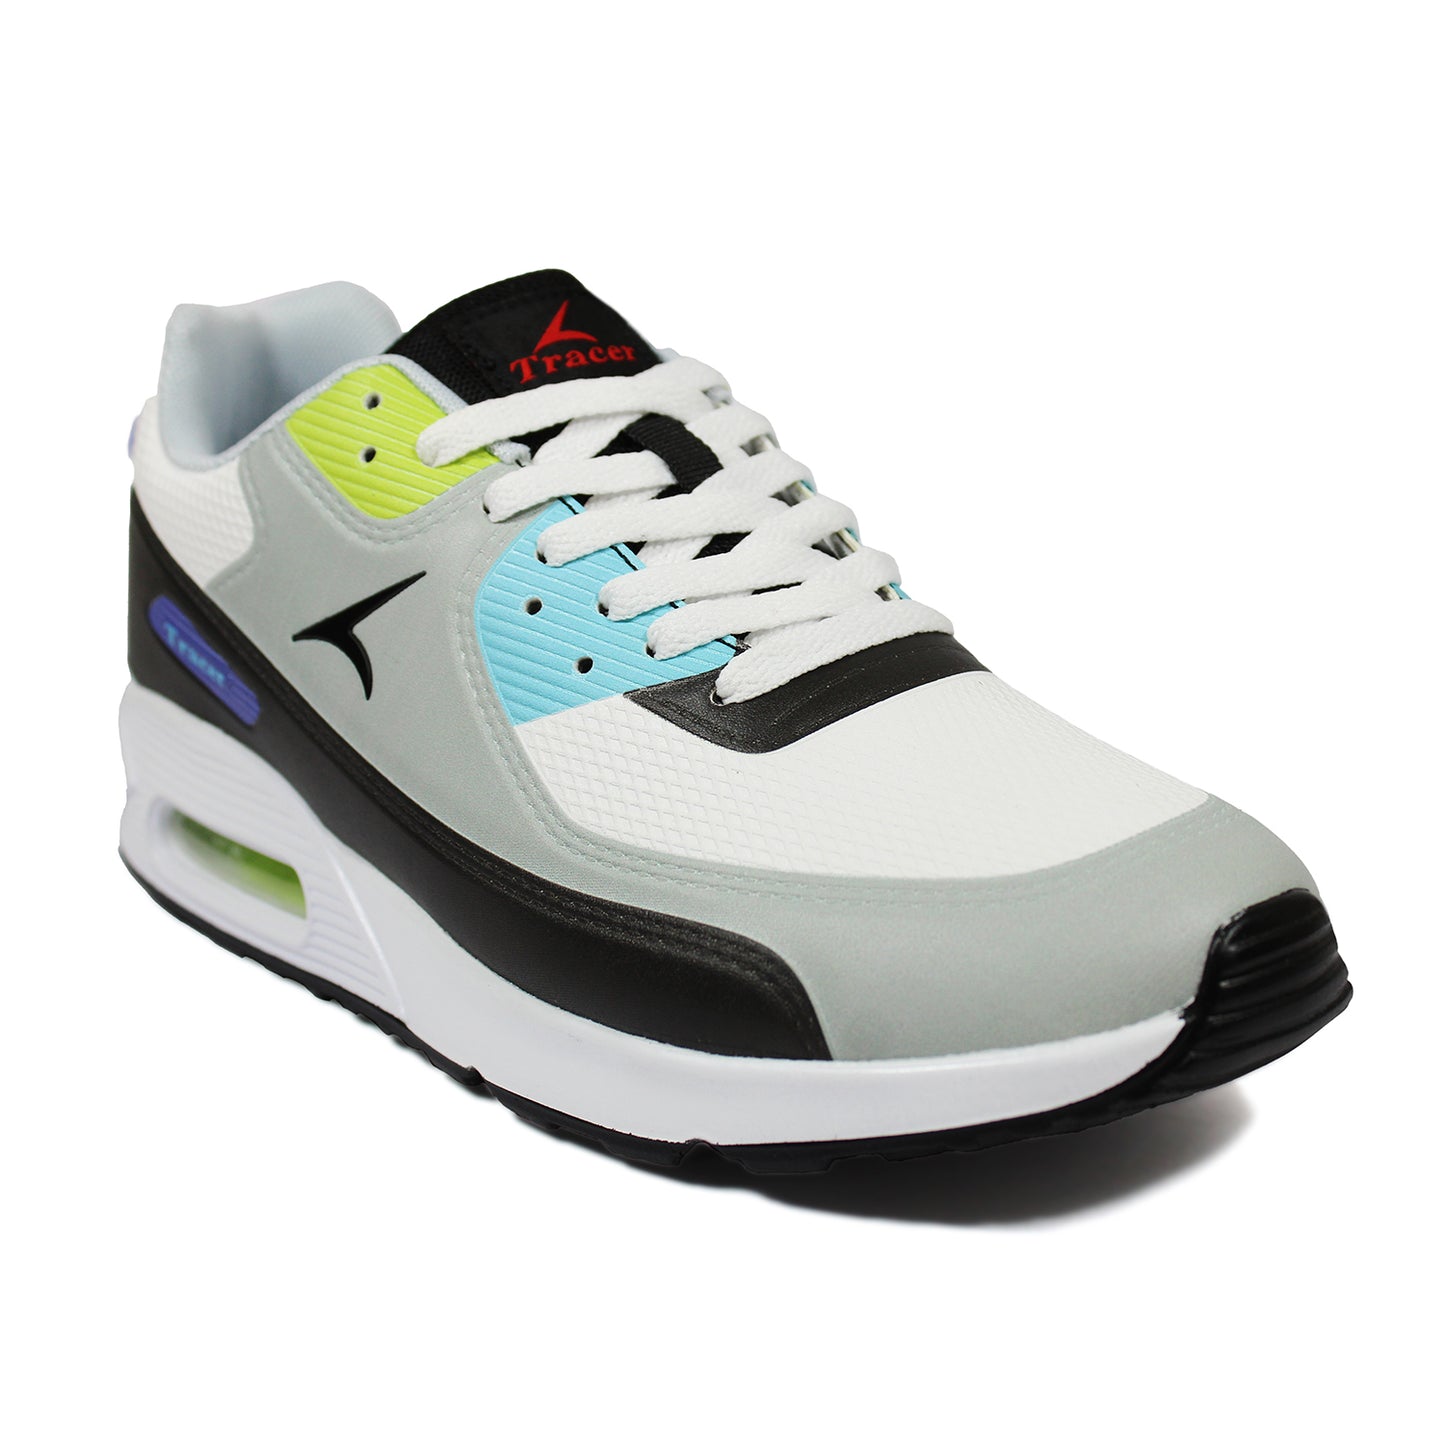 Tracer Shoes | White Multi | Men's Collection